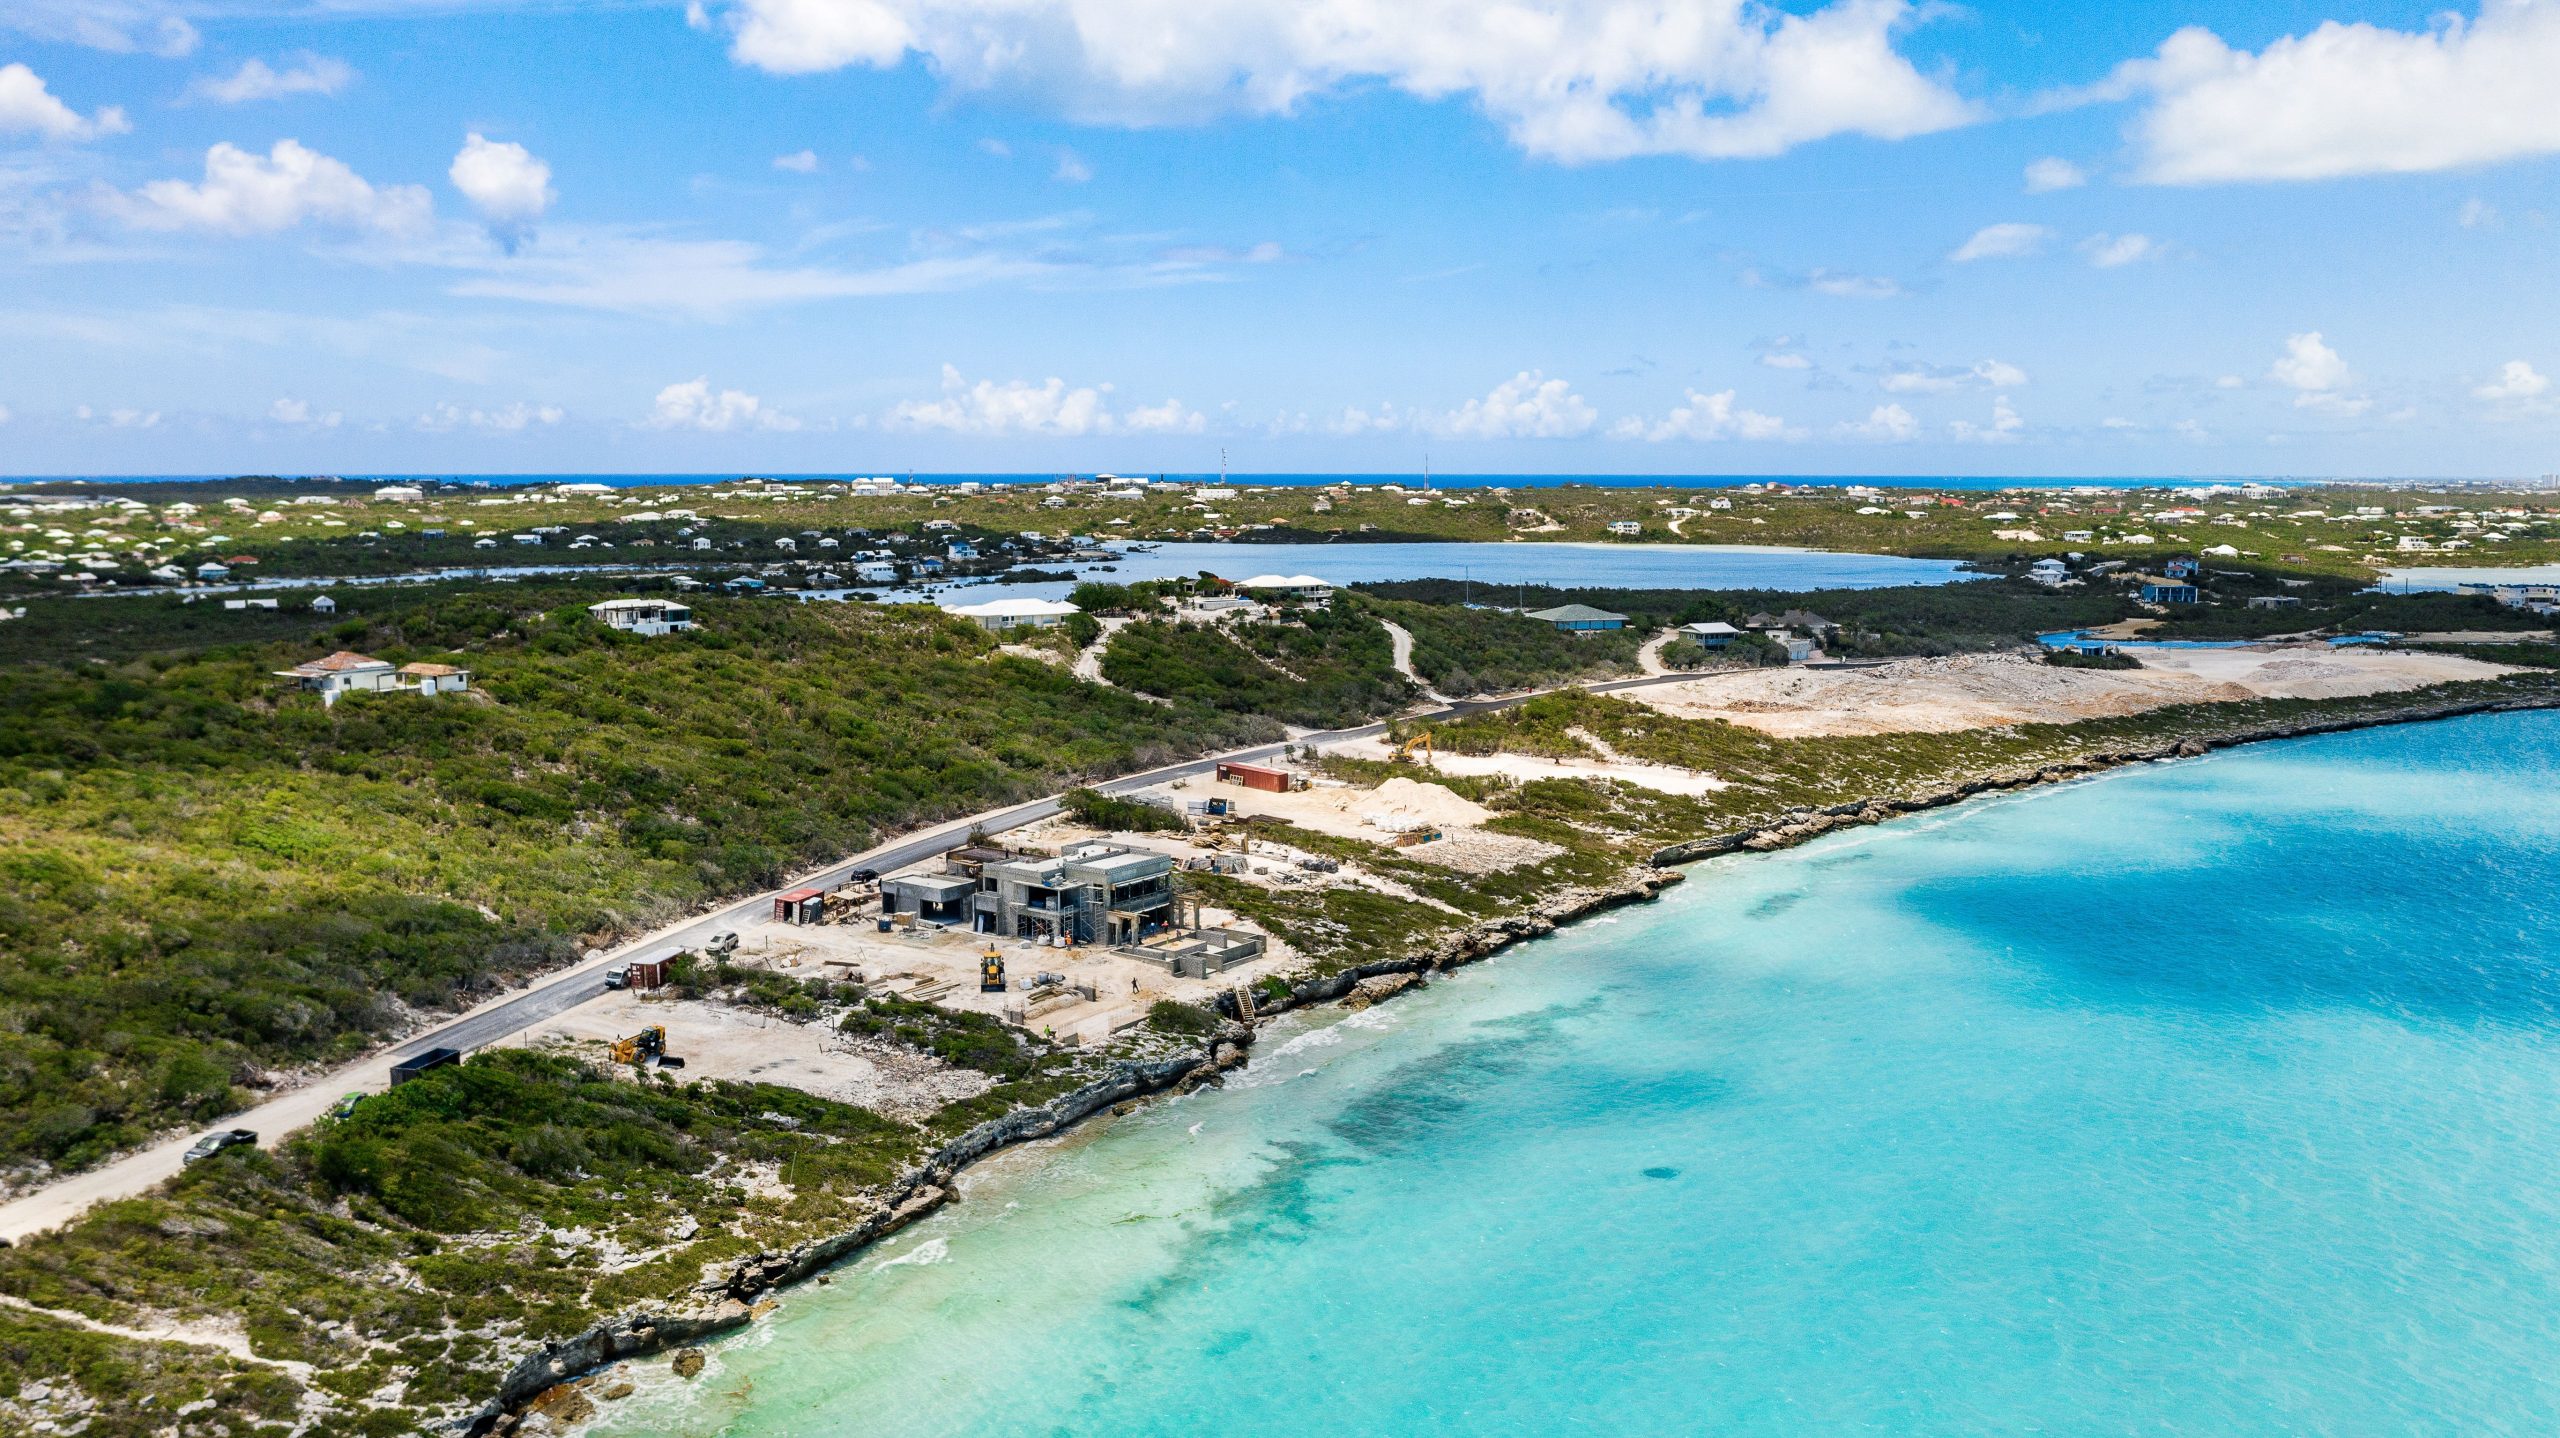 The Strand Real Estate Development Turks and Caicos